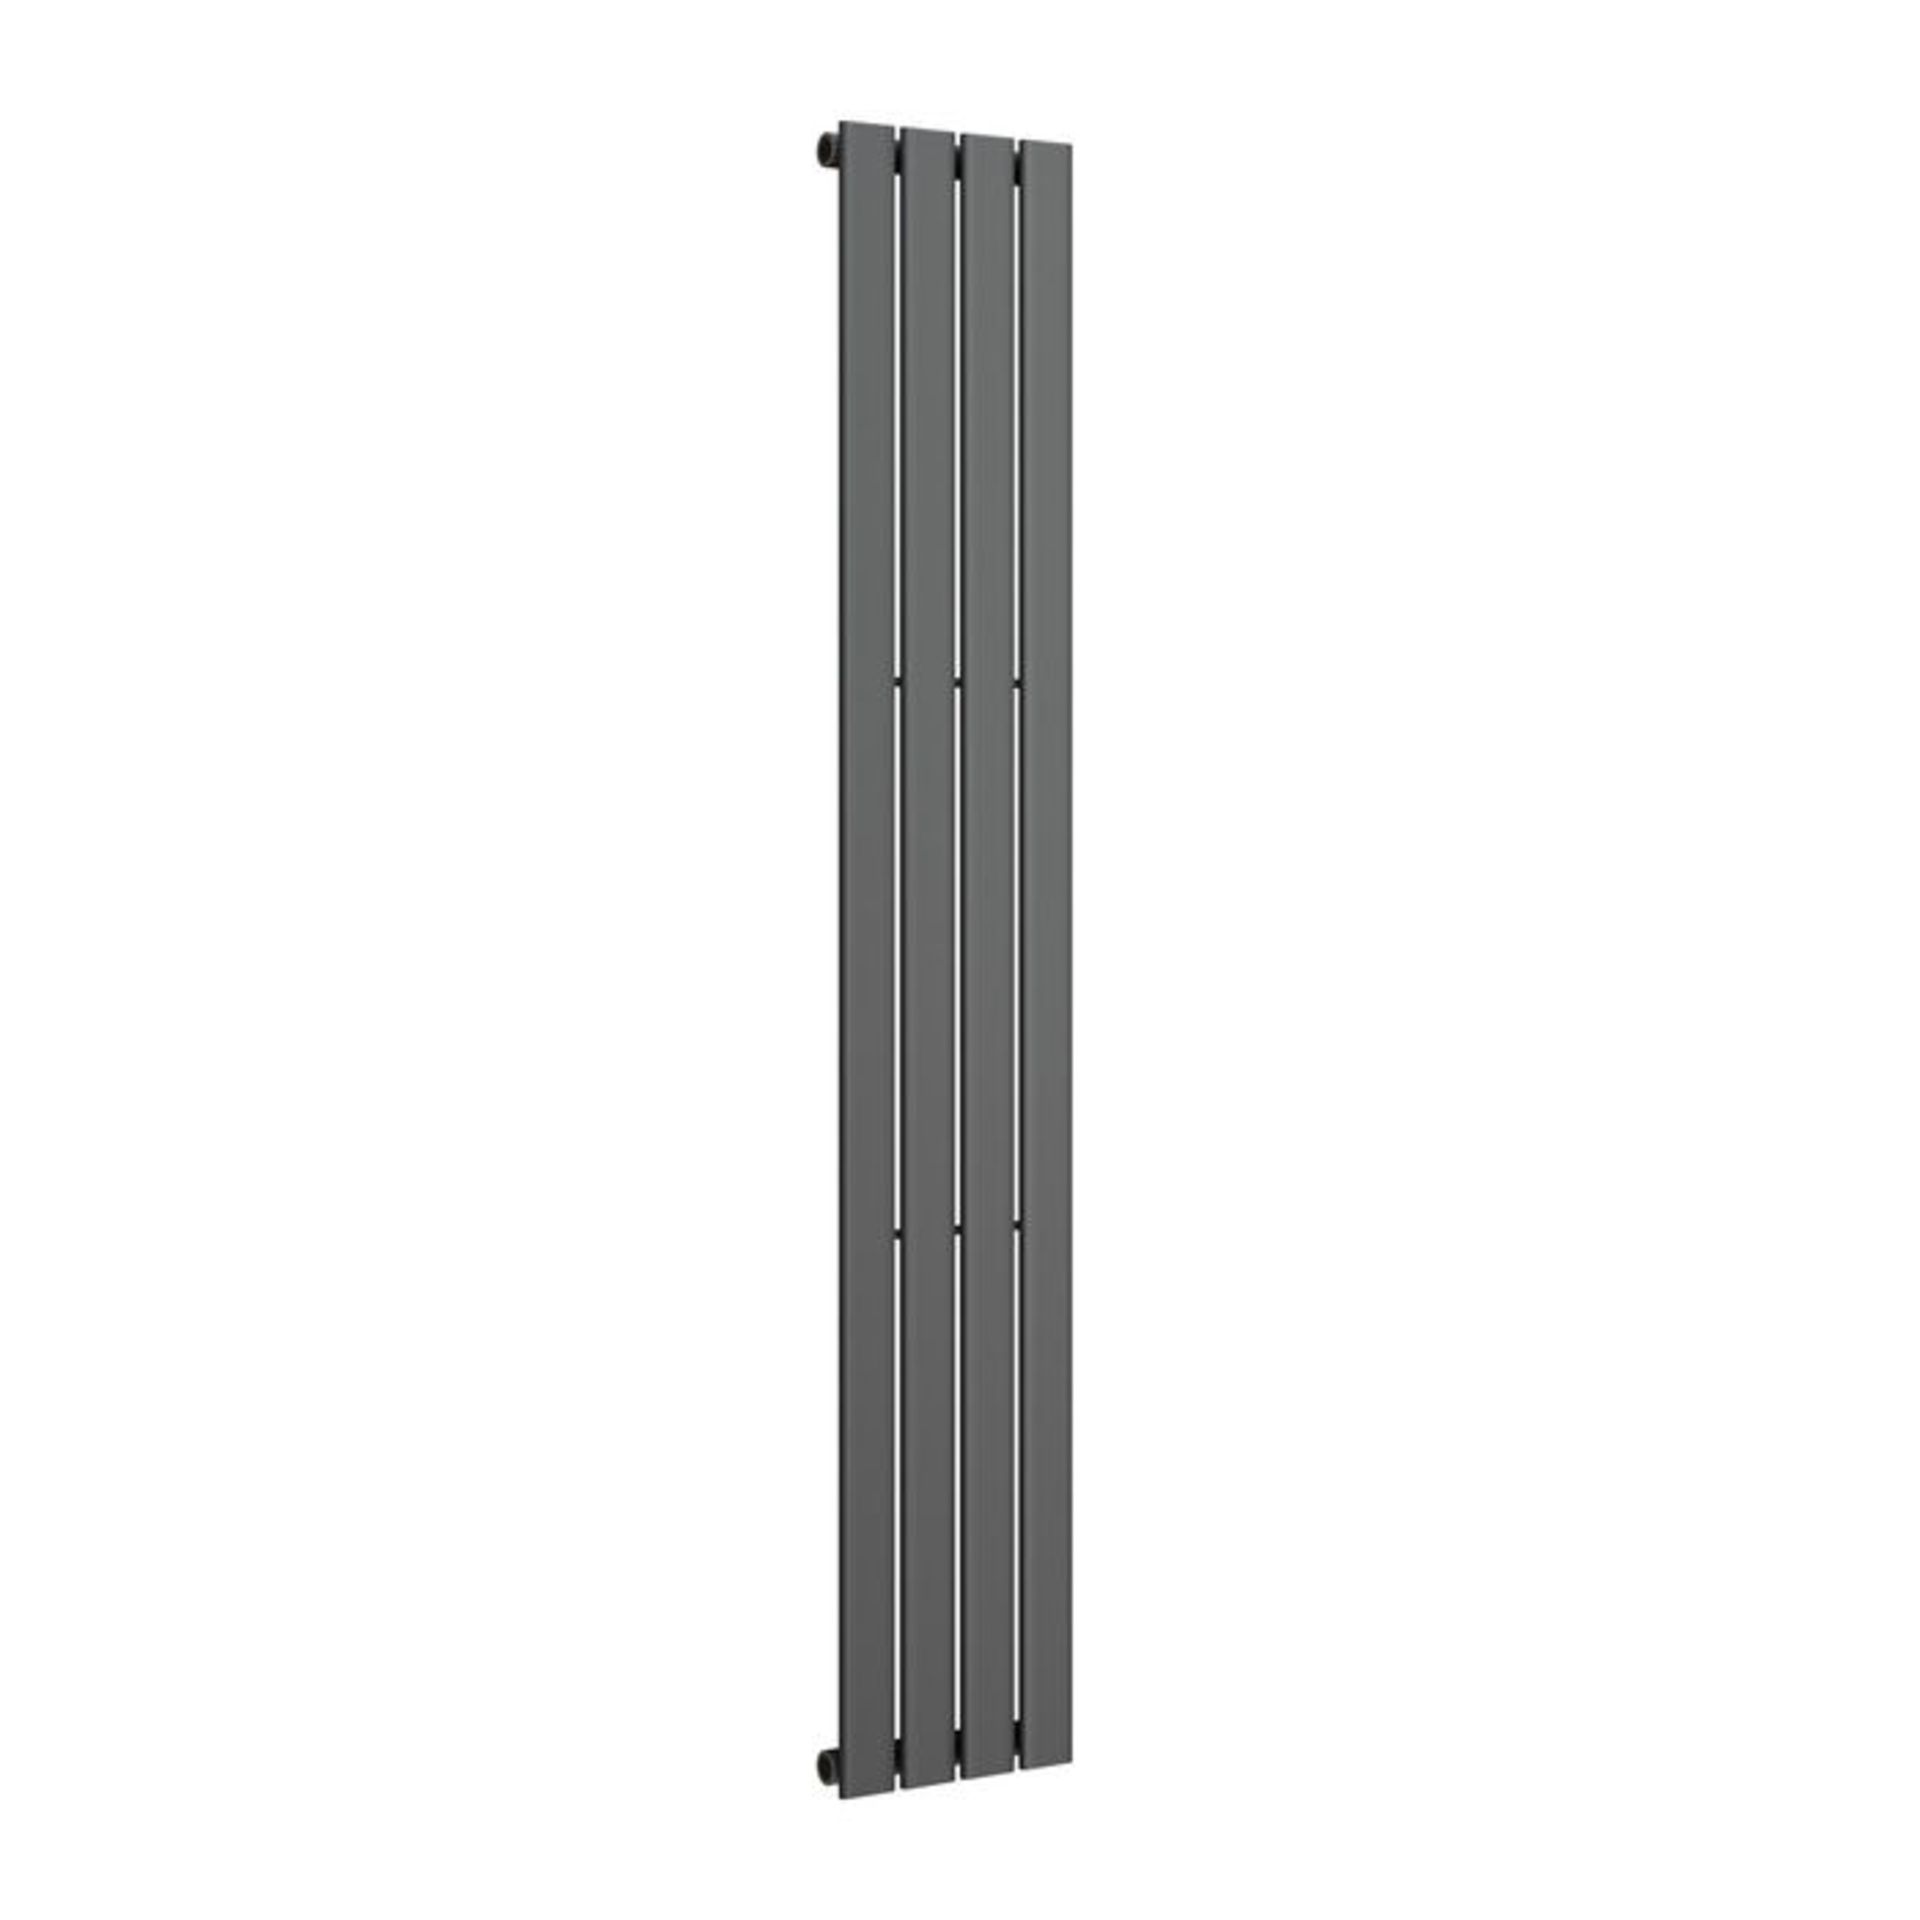 (HS113) 1800x300mm Anthracite Single Flat Panel Vertical Radiator. Made with low carbon steel Anti- - Image 3 of 3